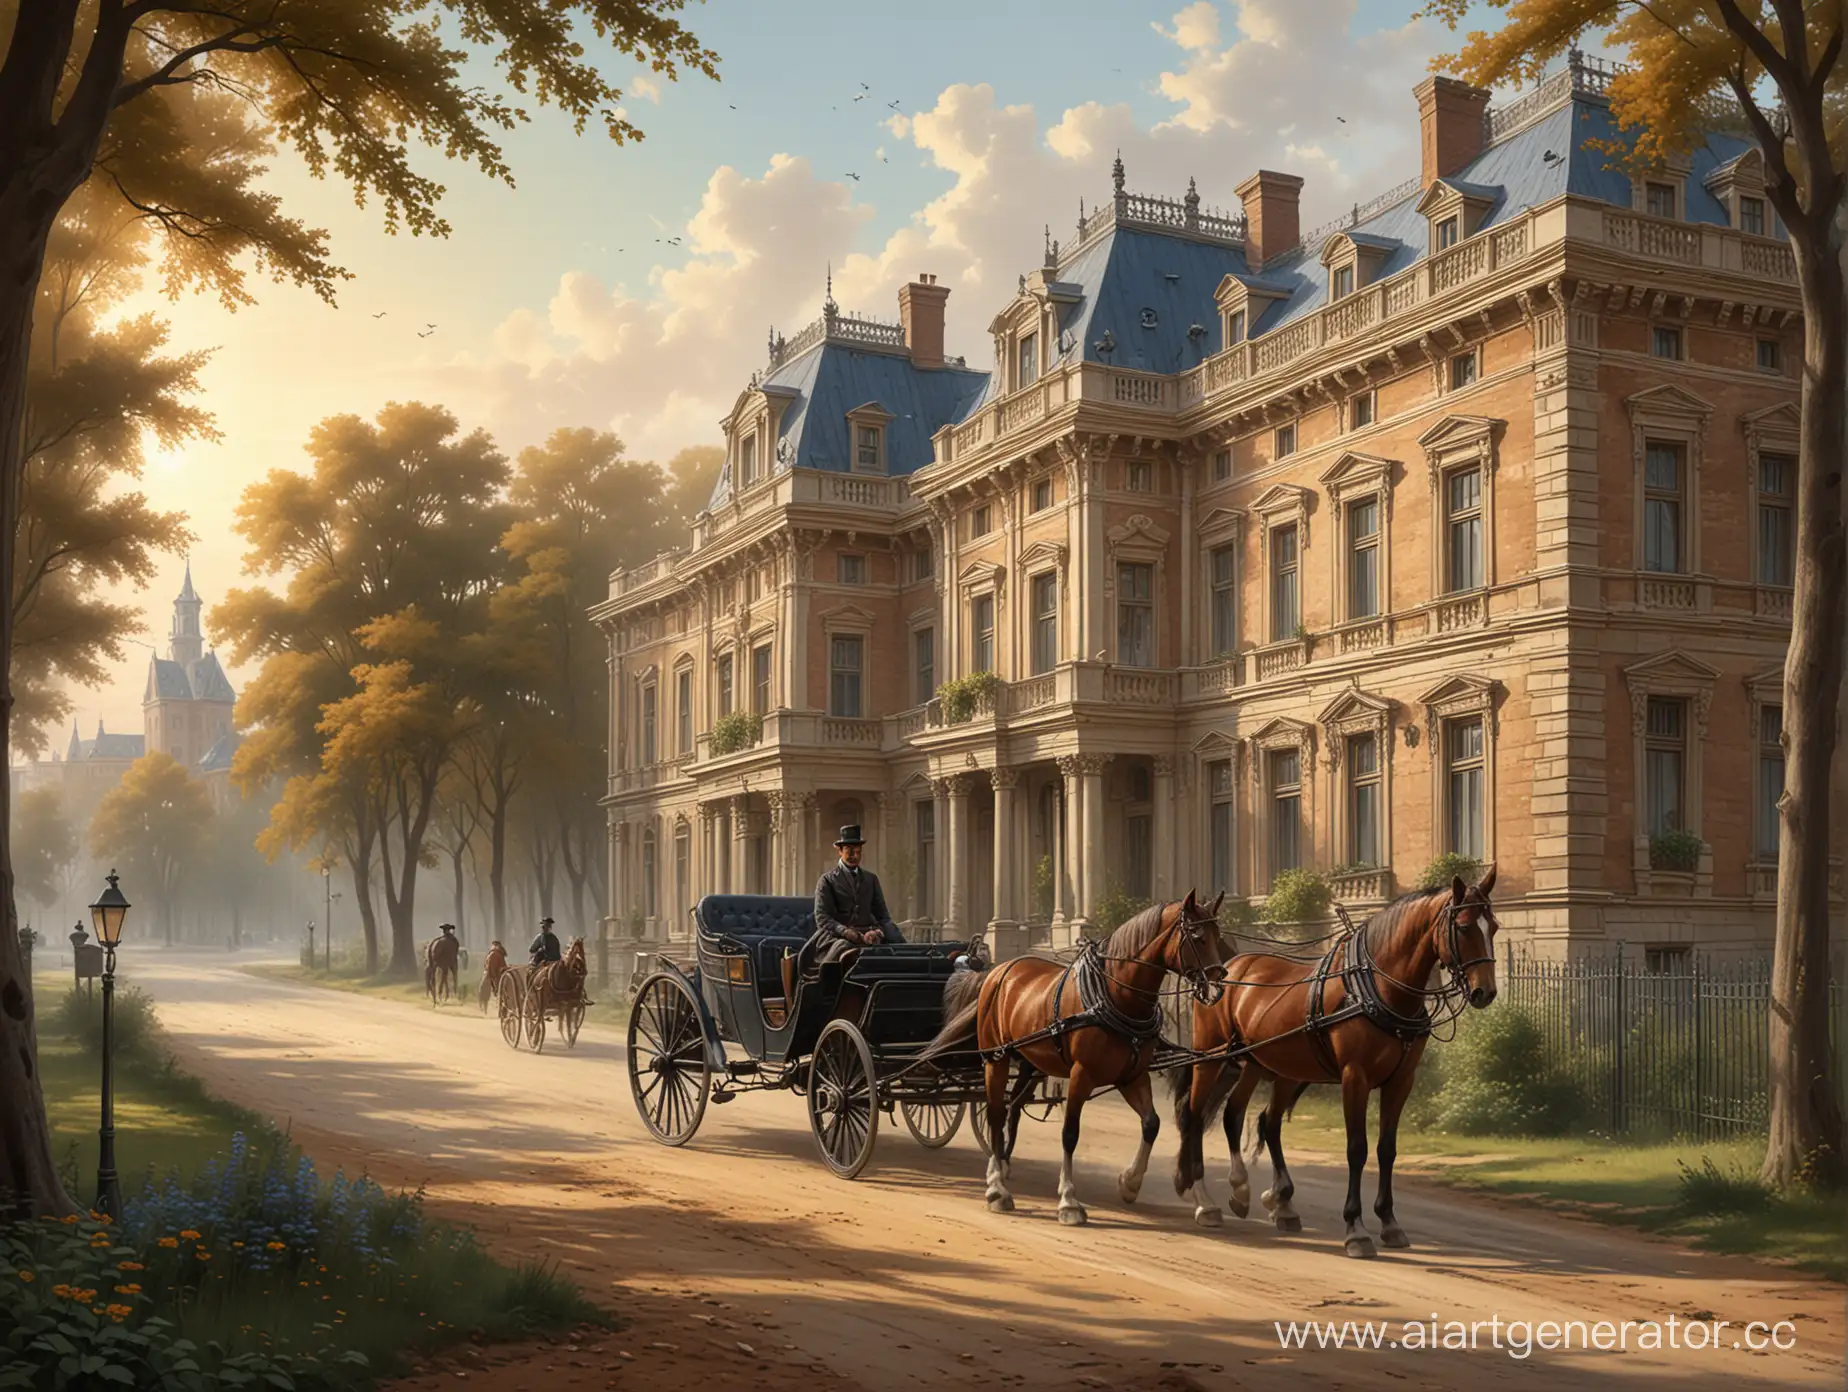 Luxurious-19th-Century-Mansion-with-HorseDrawn-Carriage-on-Country-Road